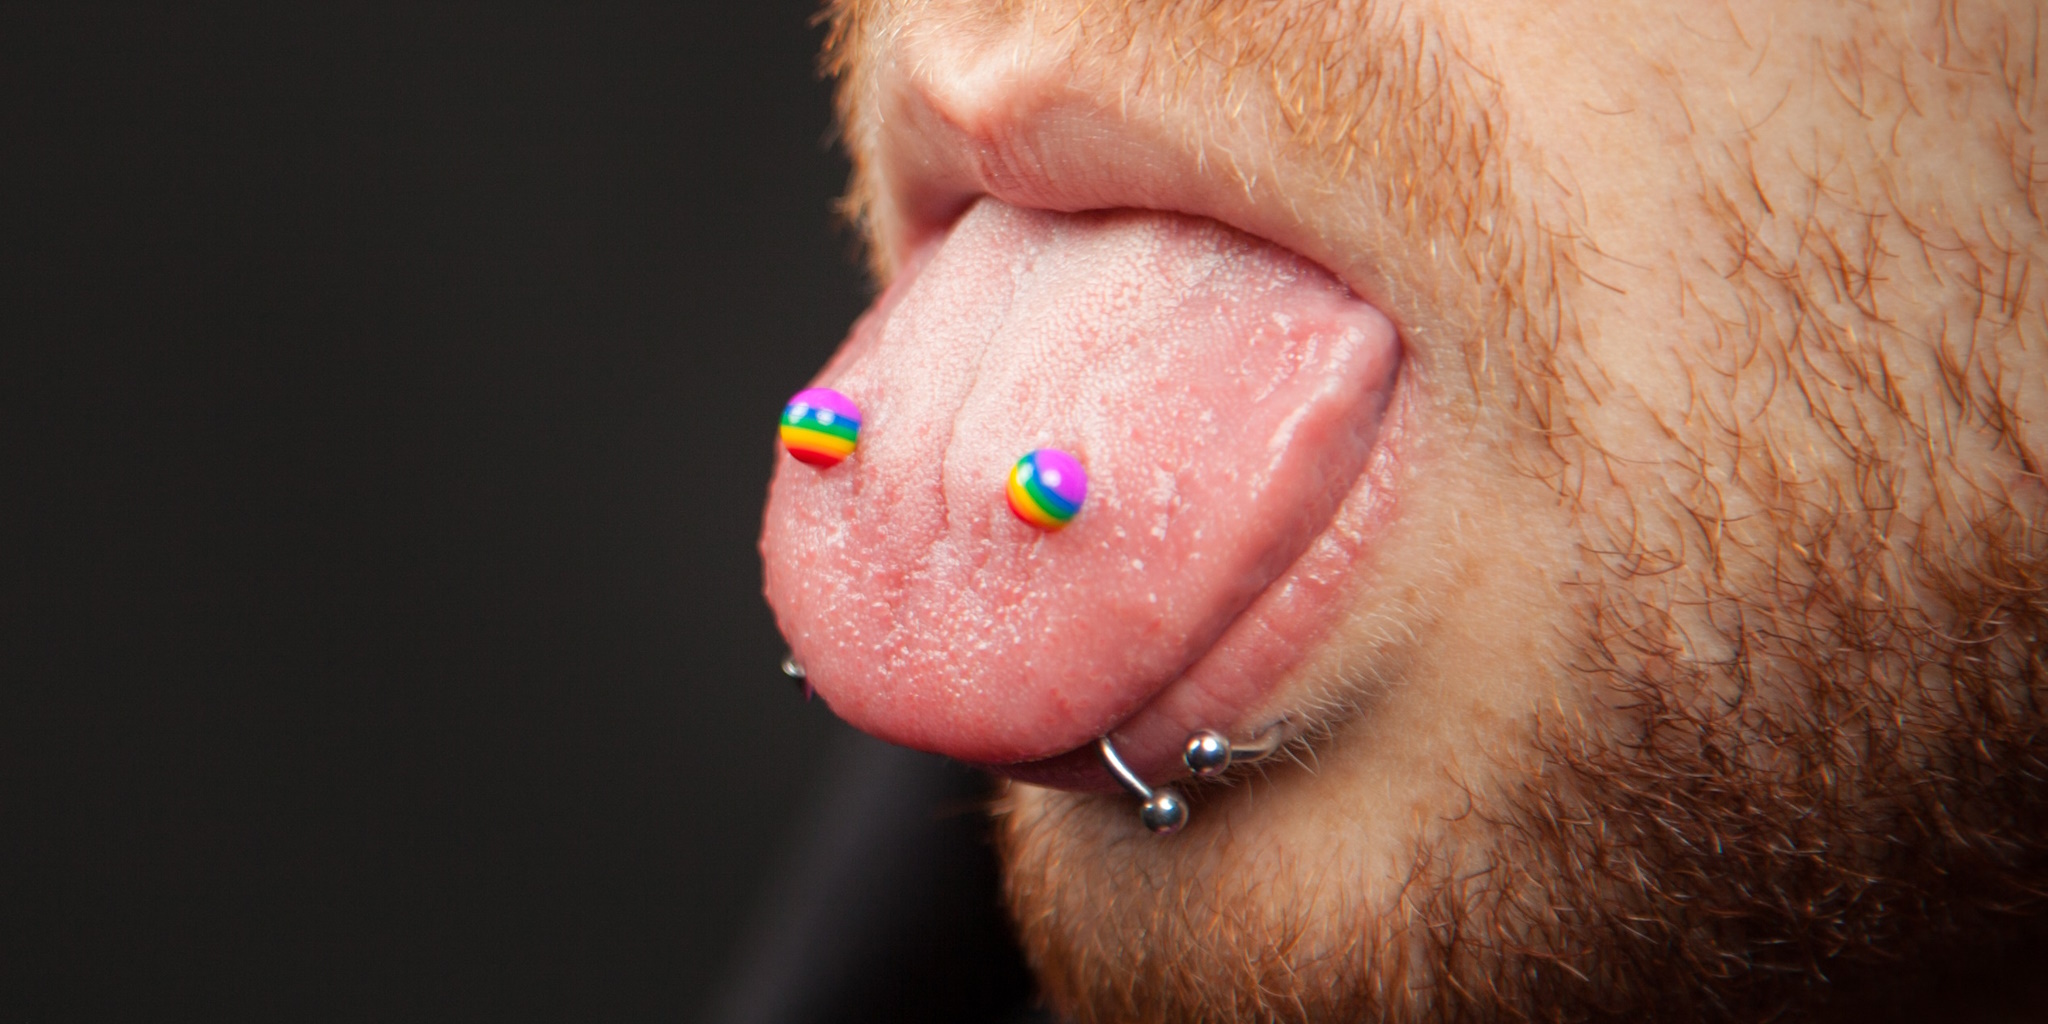 A man displaying a frog eyes piercing that has rainbow color balls on the ends of his tongue bars.